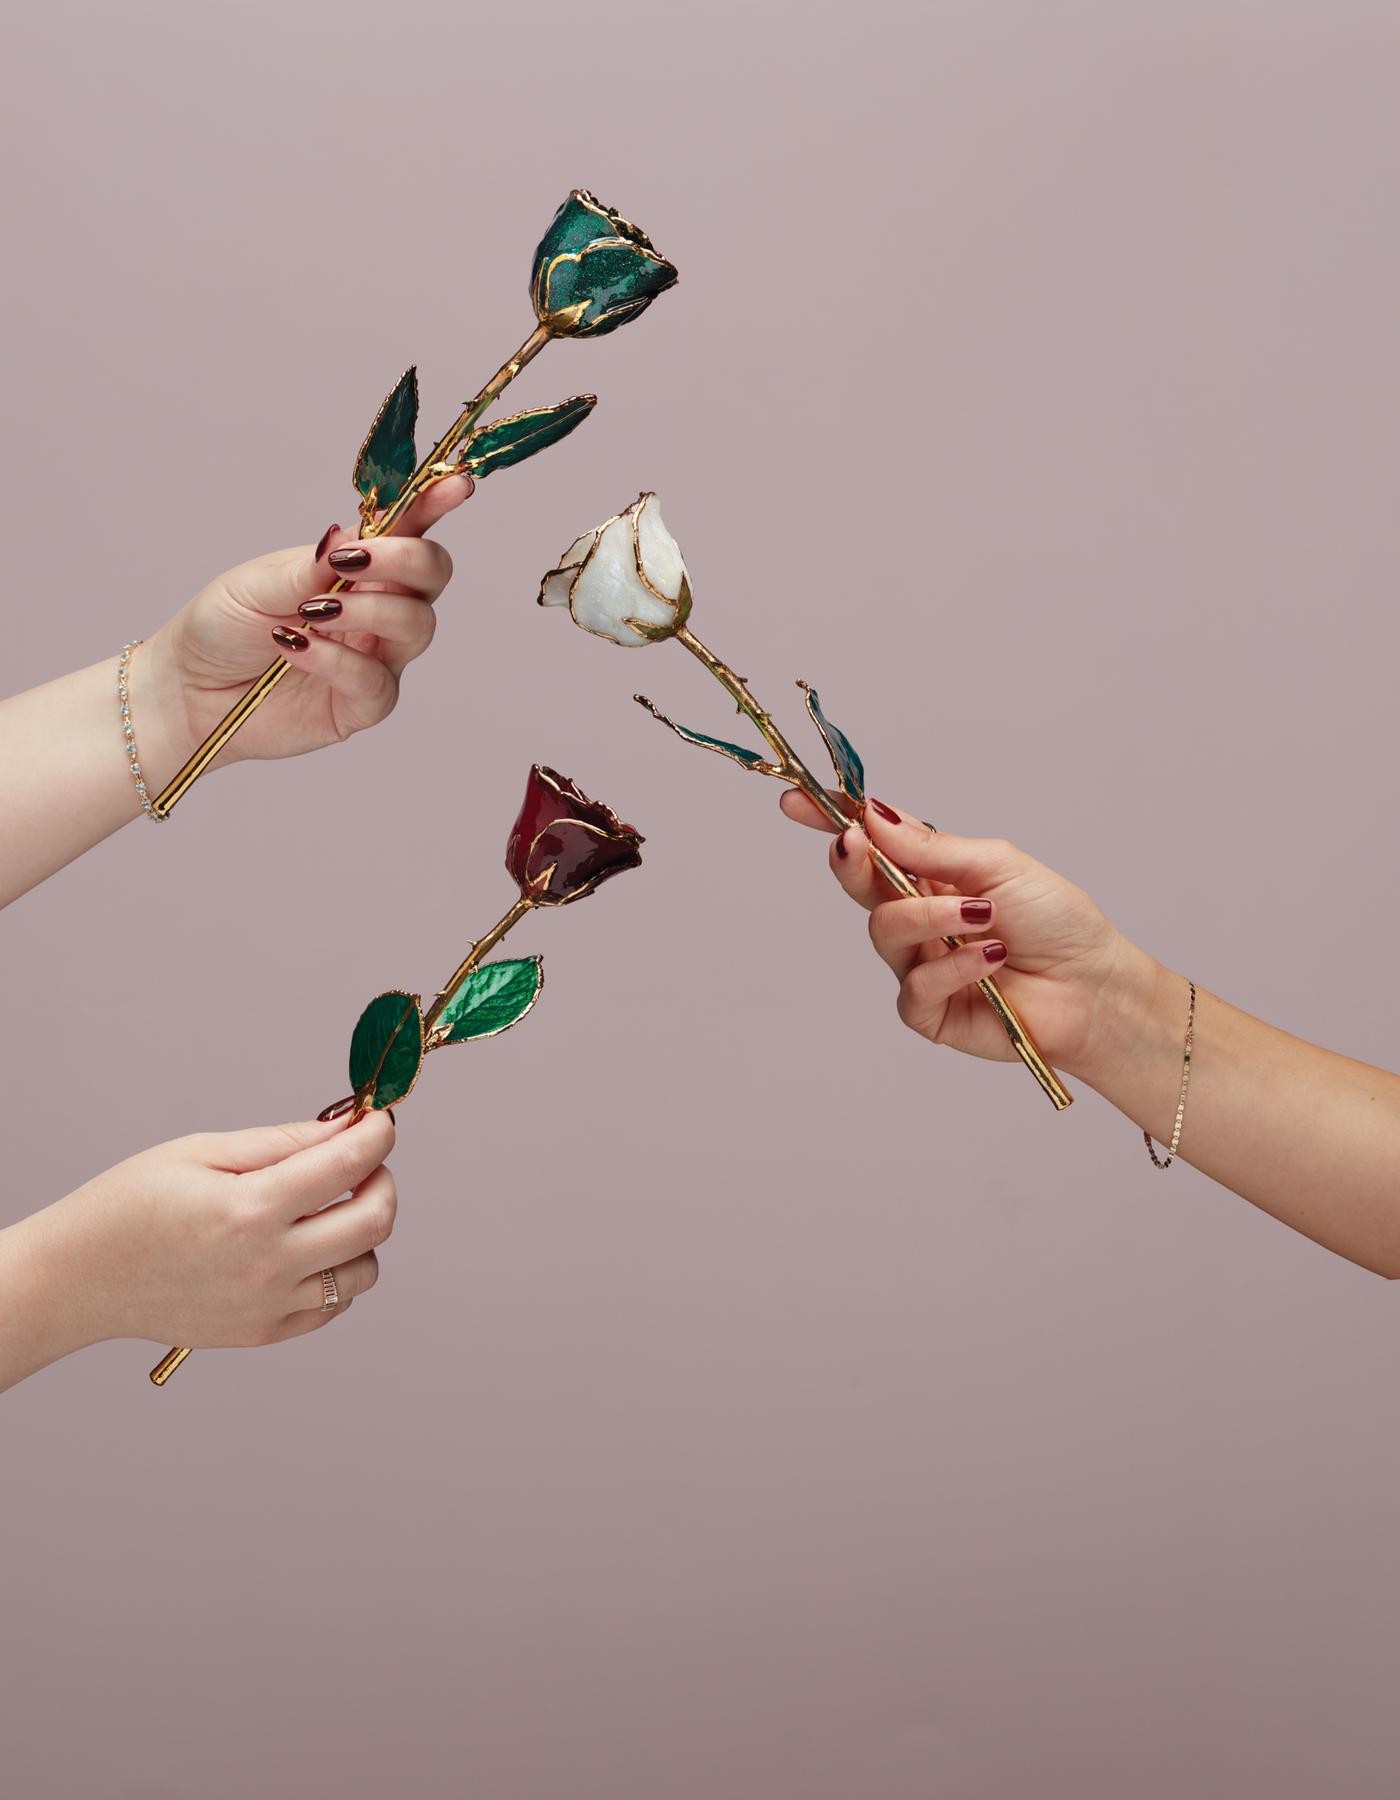 Three women's hands are shown, each holding an Everlasting Rose. They appear to be giving them to each other.